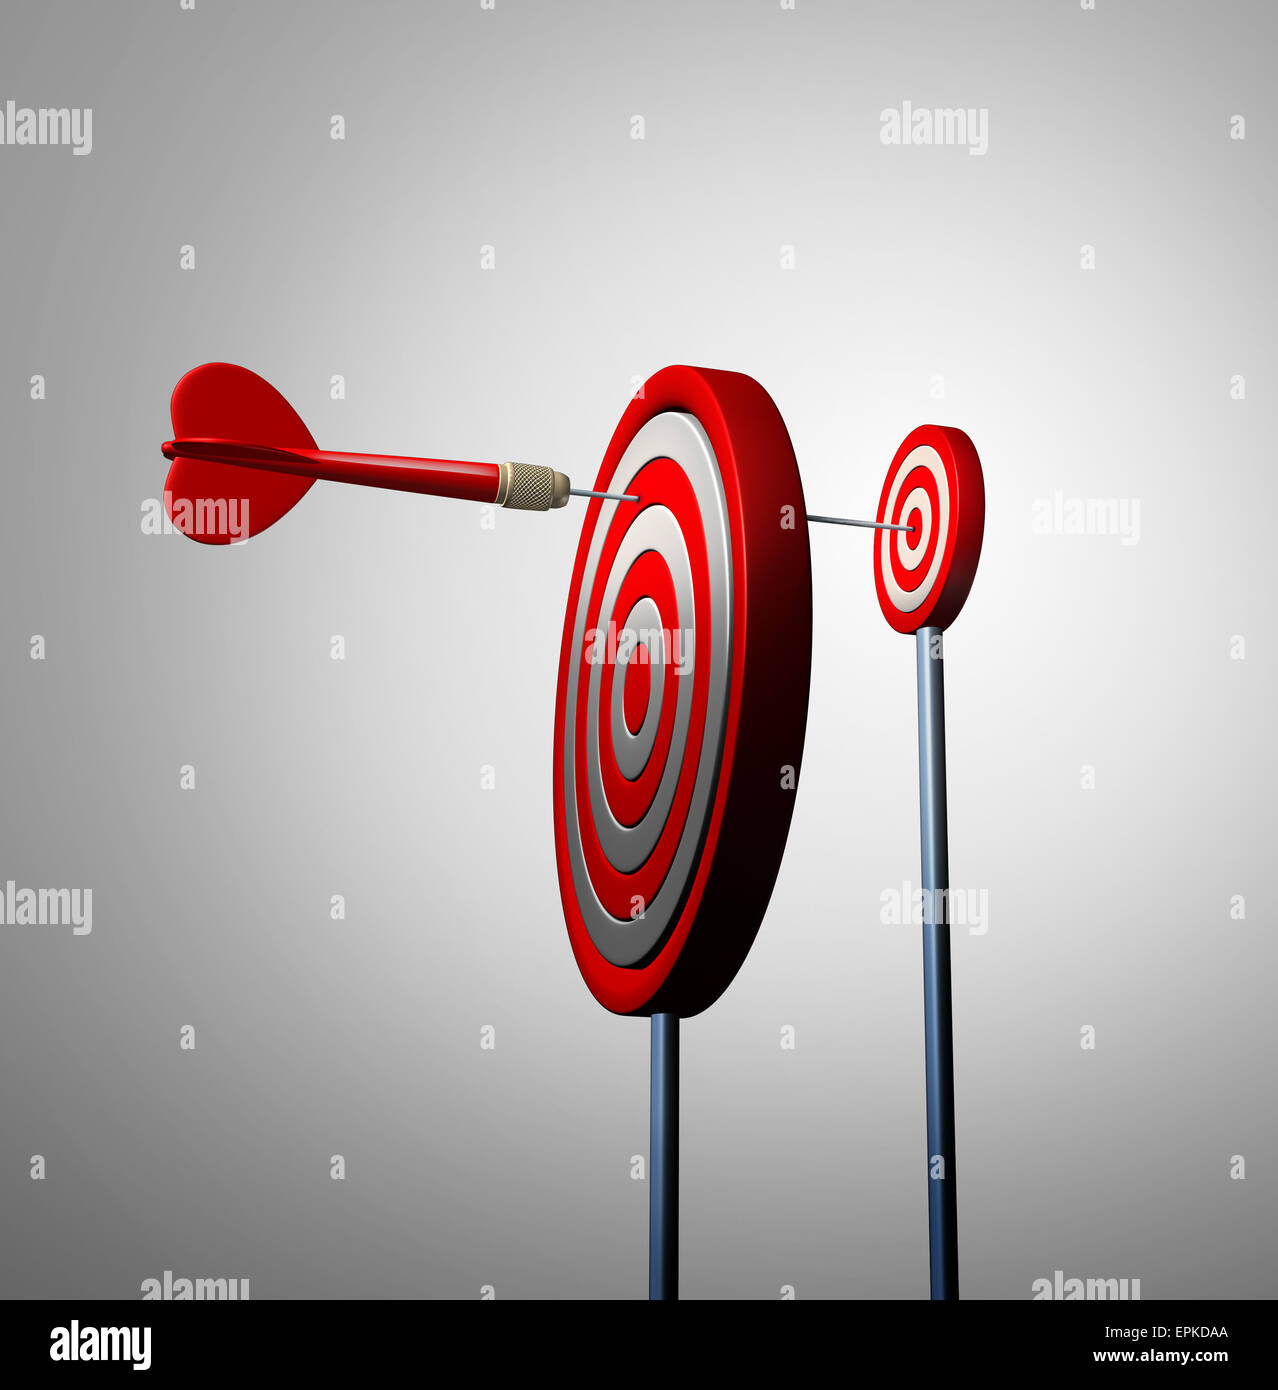 Find an opportunity out of view and hidden opportunities business concept as a red dart reaching over to the next target bulls eye to achieve success as a financial metaphor for long strategy and winning goal vision. Stock Photo